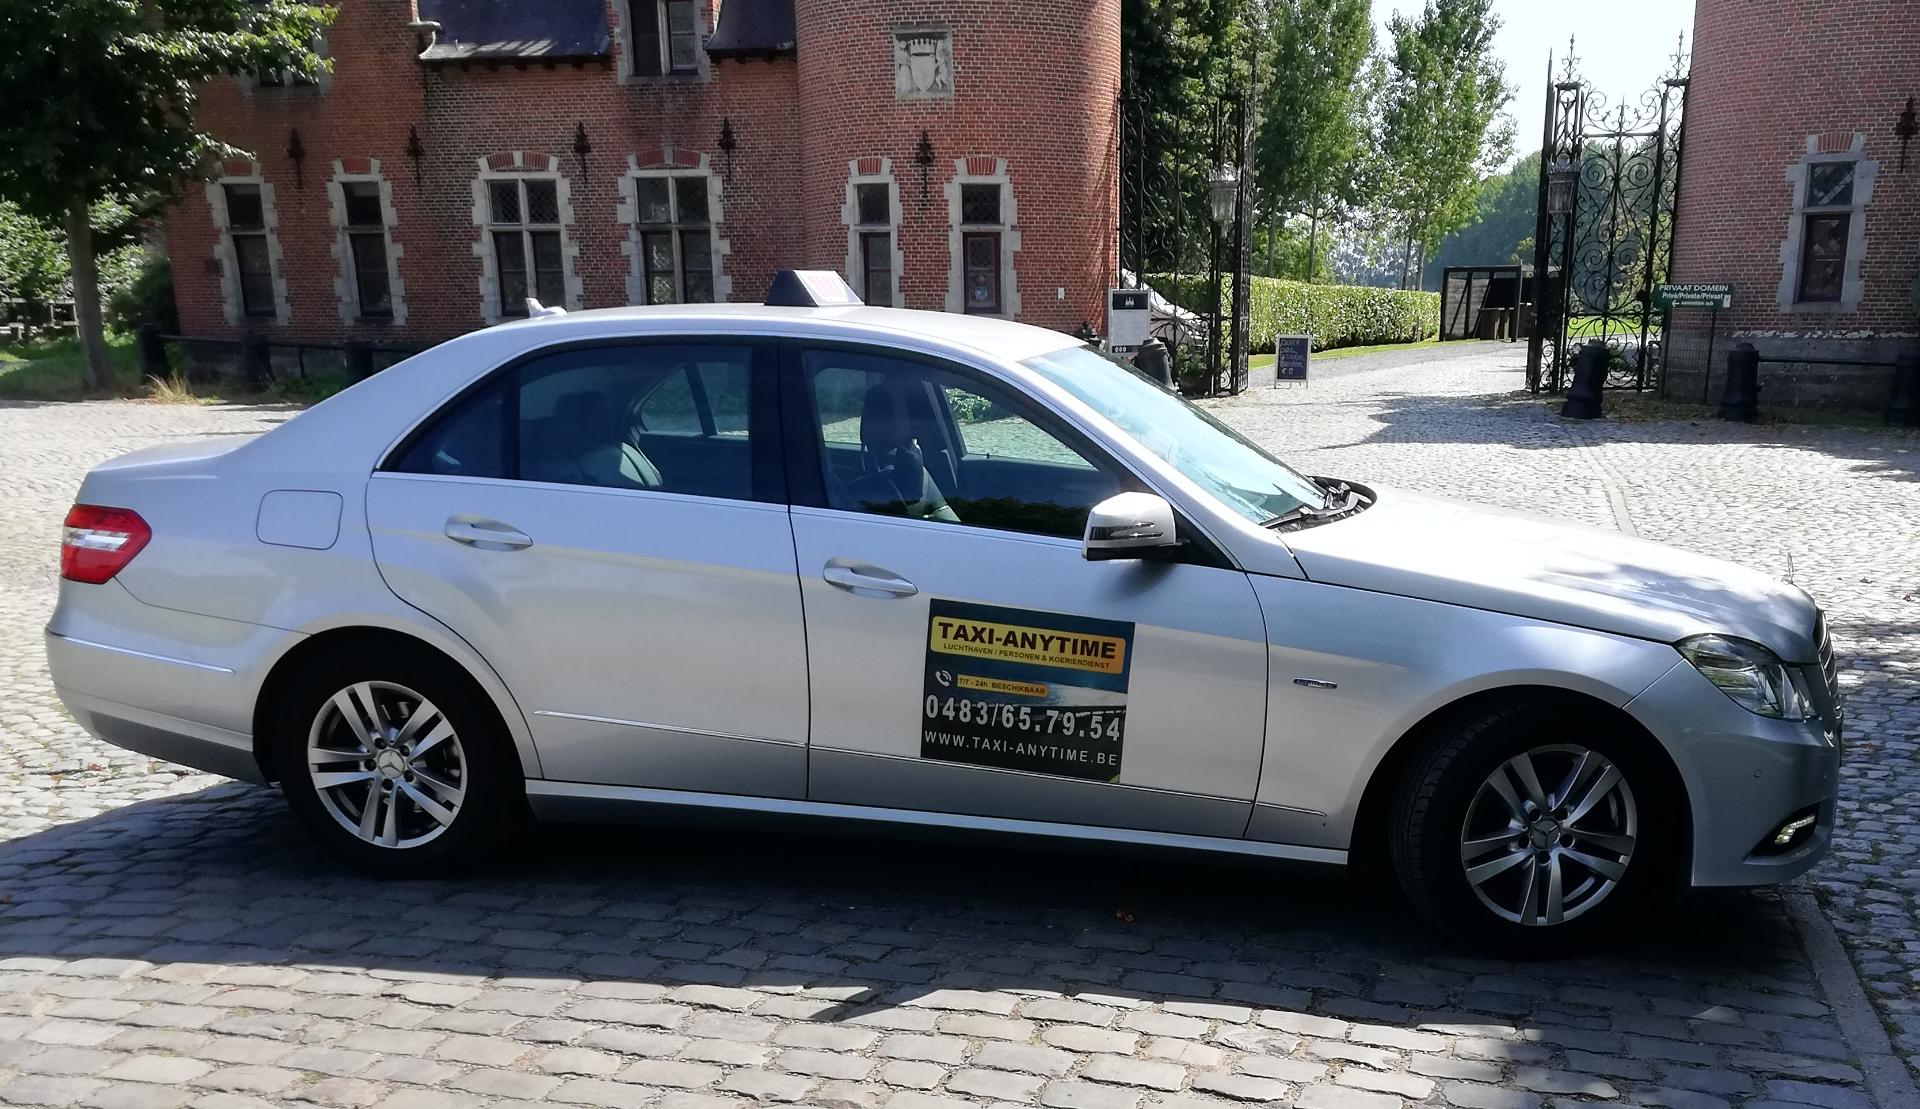 transportbedrijven Oostende | Taxi Anytime